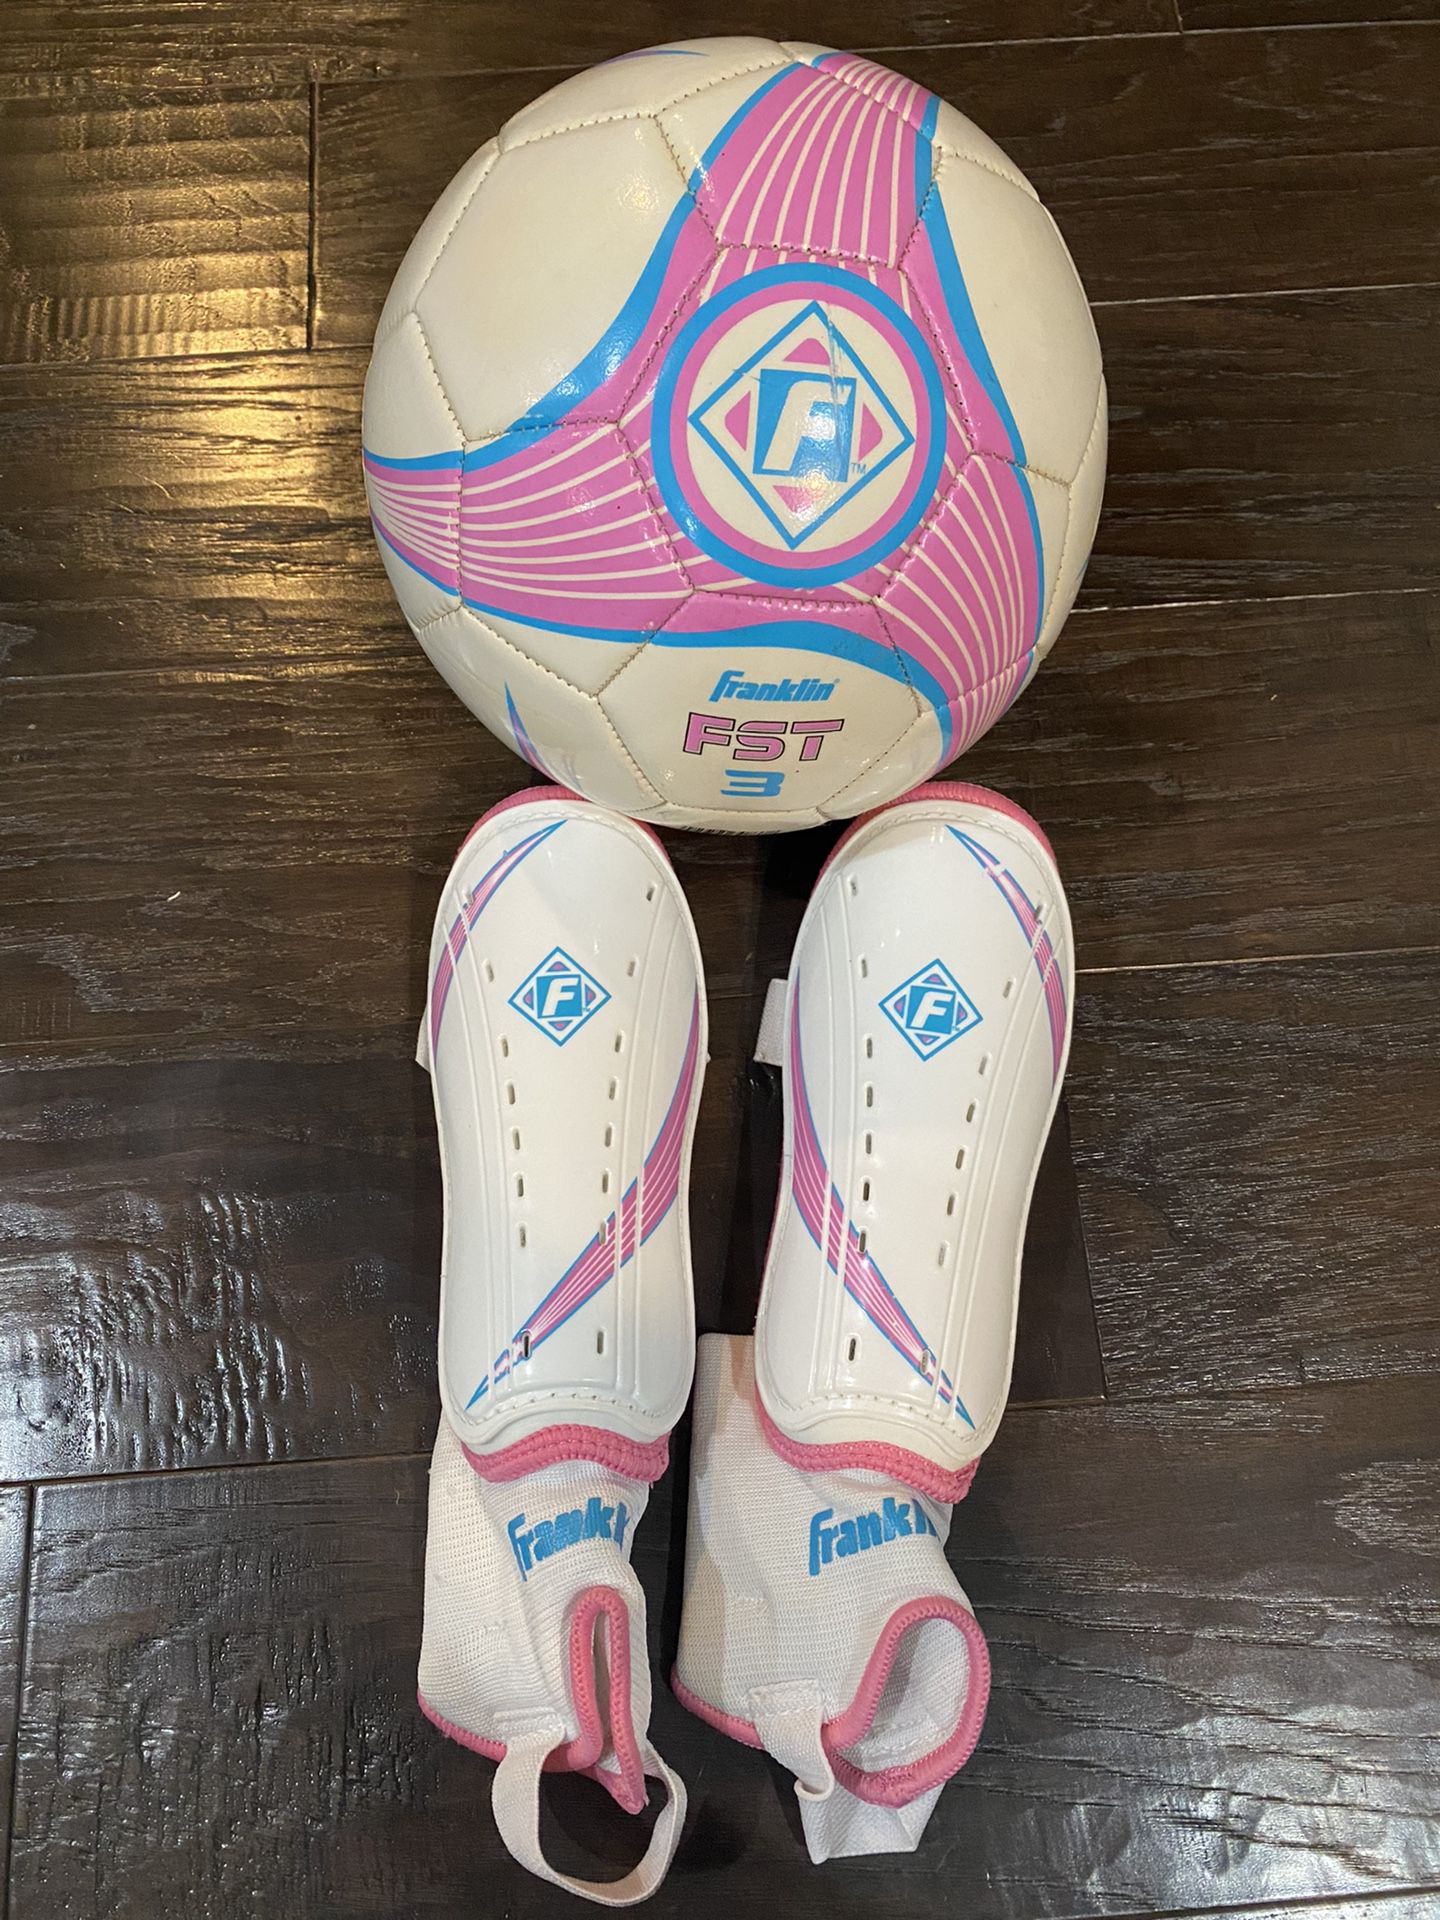 Franklin Soccer Ball with matching Franklin Shinguards for Kids